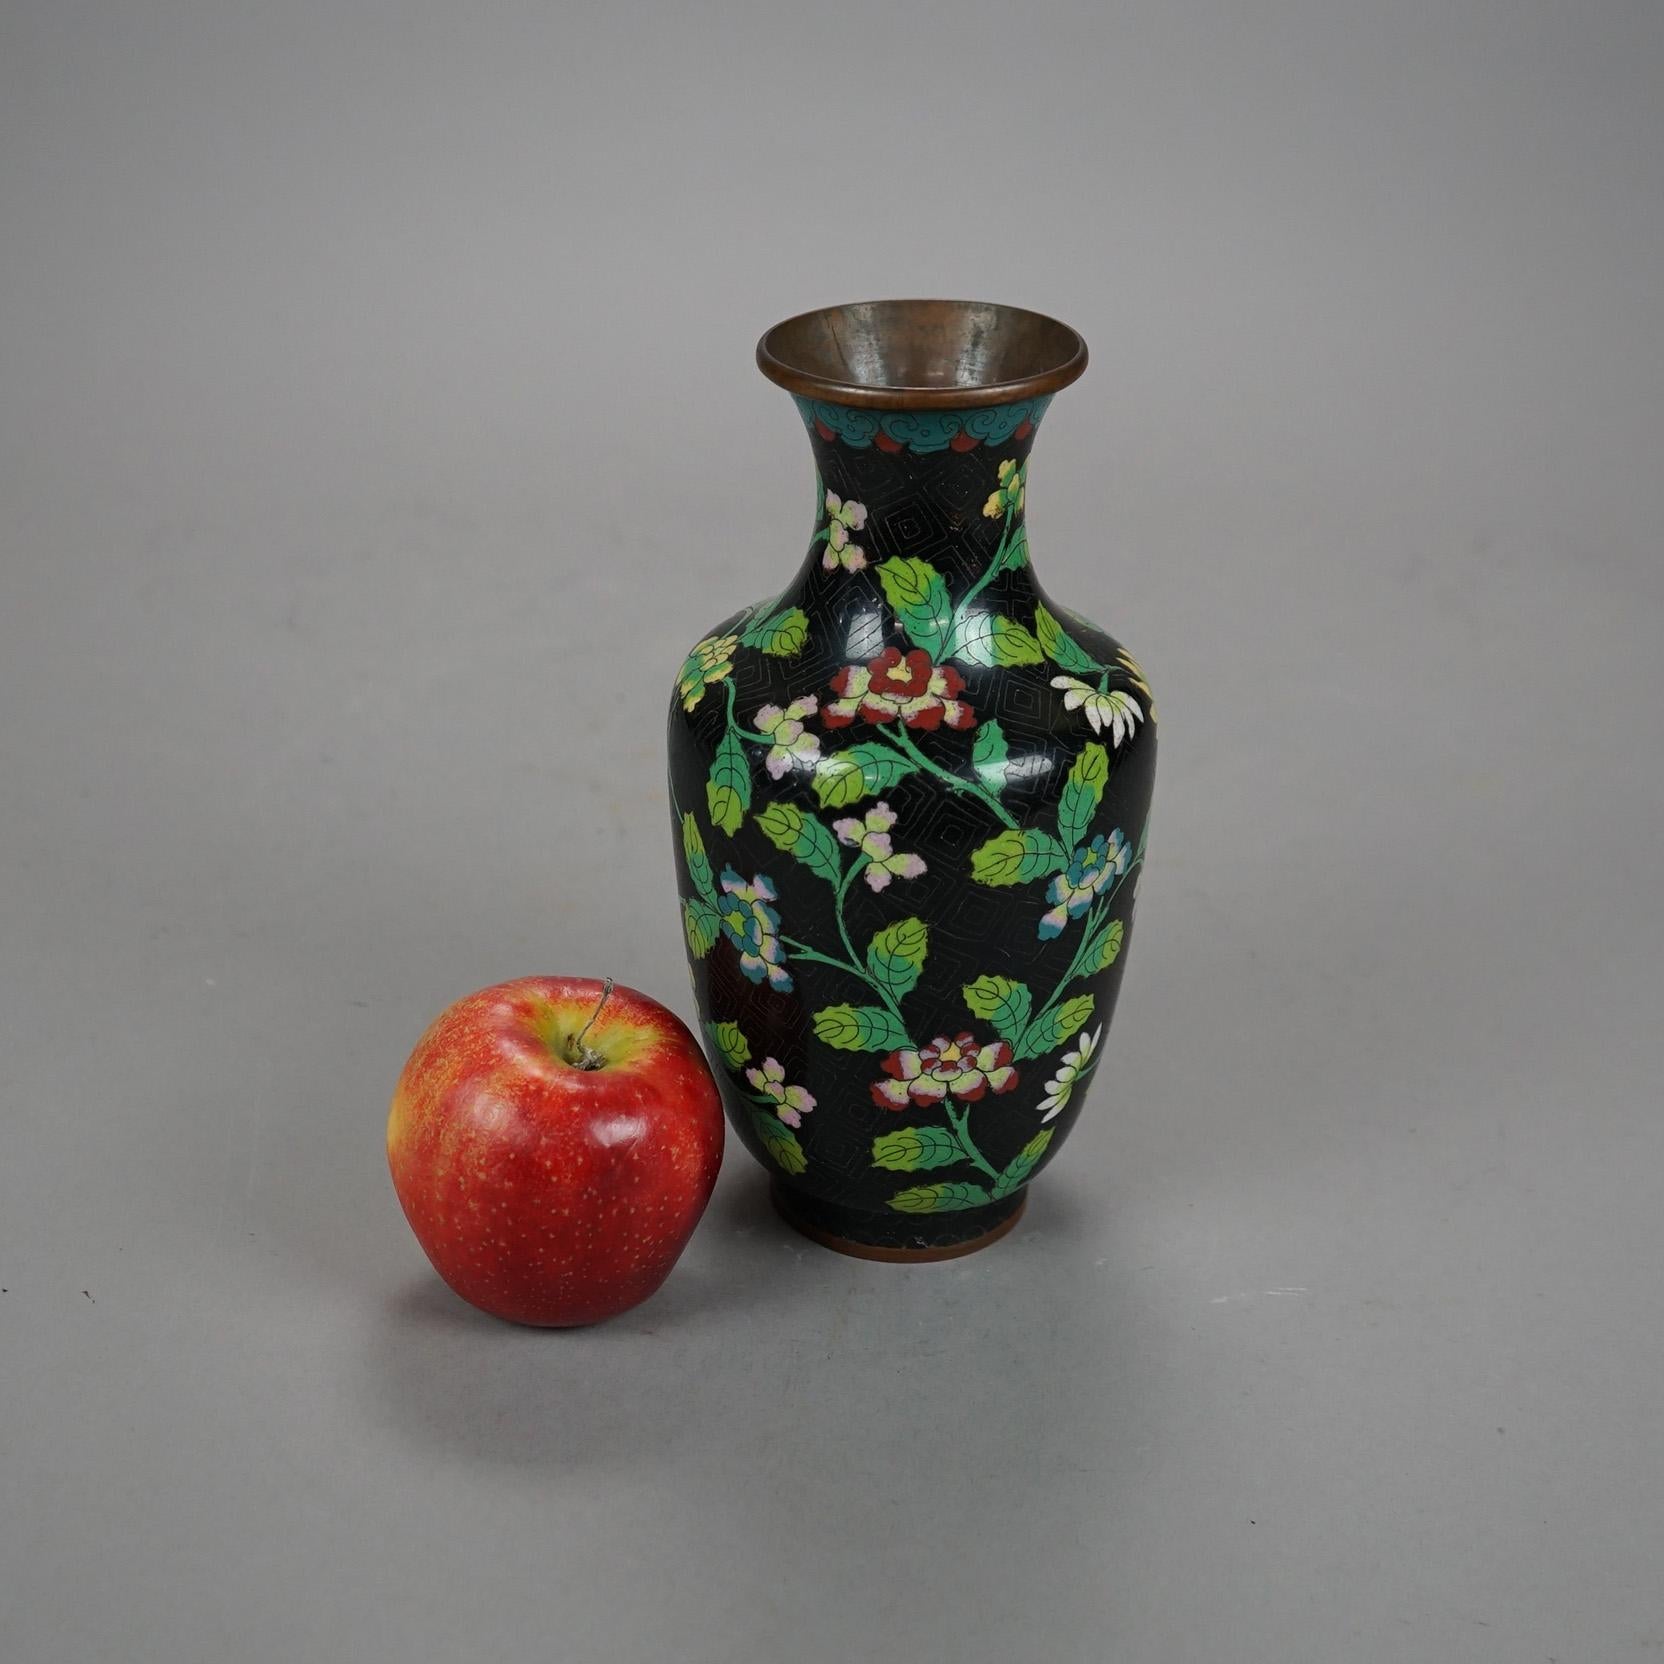 An antique Chinese vase offers Cloisonne enameled allover flora design, stamped China on base as photographed, c1920

Measures - 9''H x 4.5''W x 4.5''D.

Catalogue Note: Ask about DISCOUNTED DELIVERY RATES available to most regions within 1,500